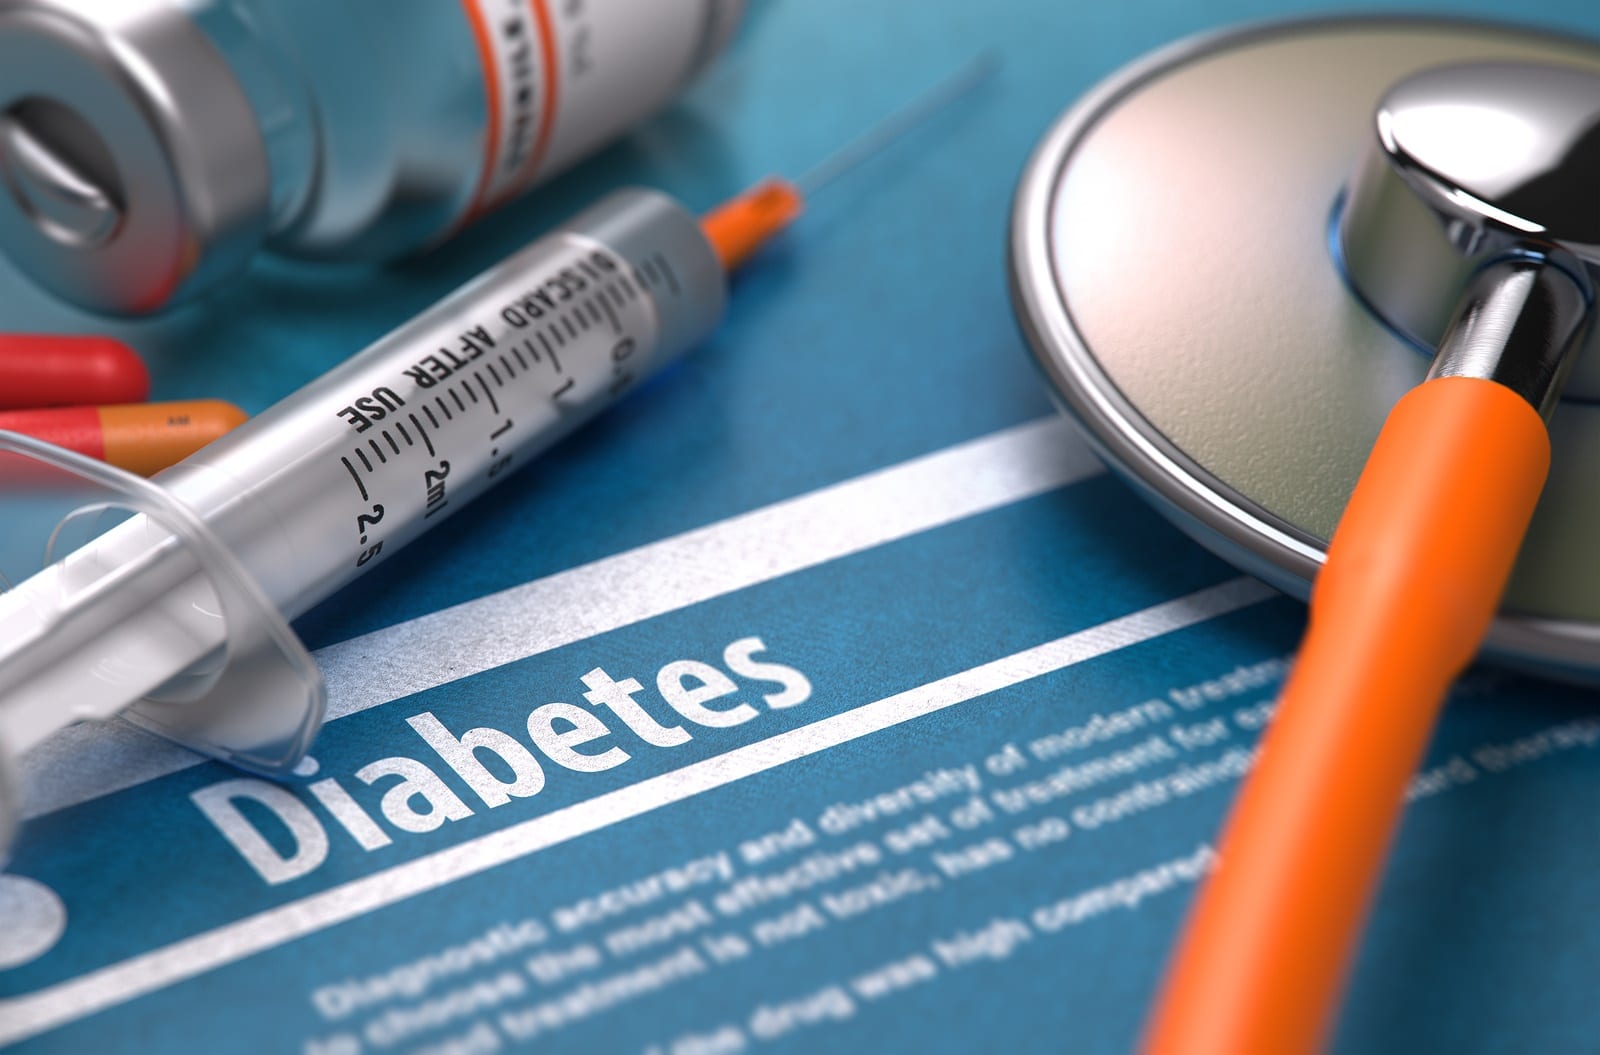 is there any new research on diabetes